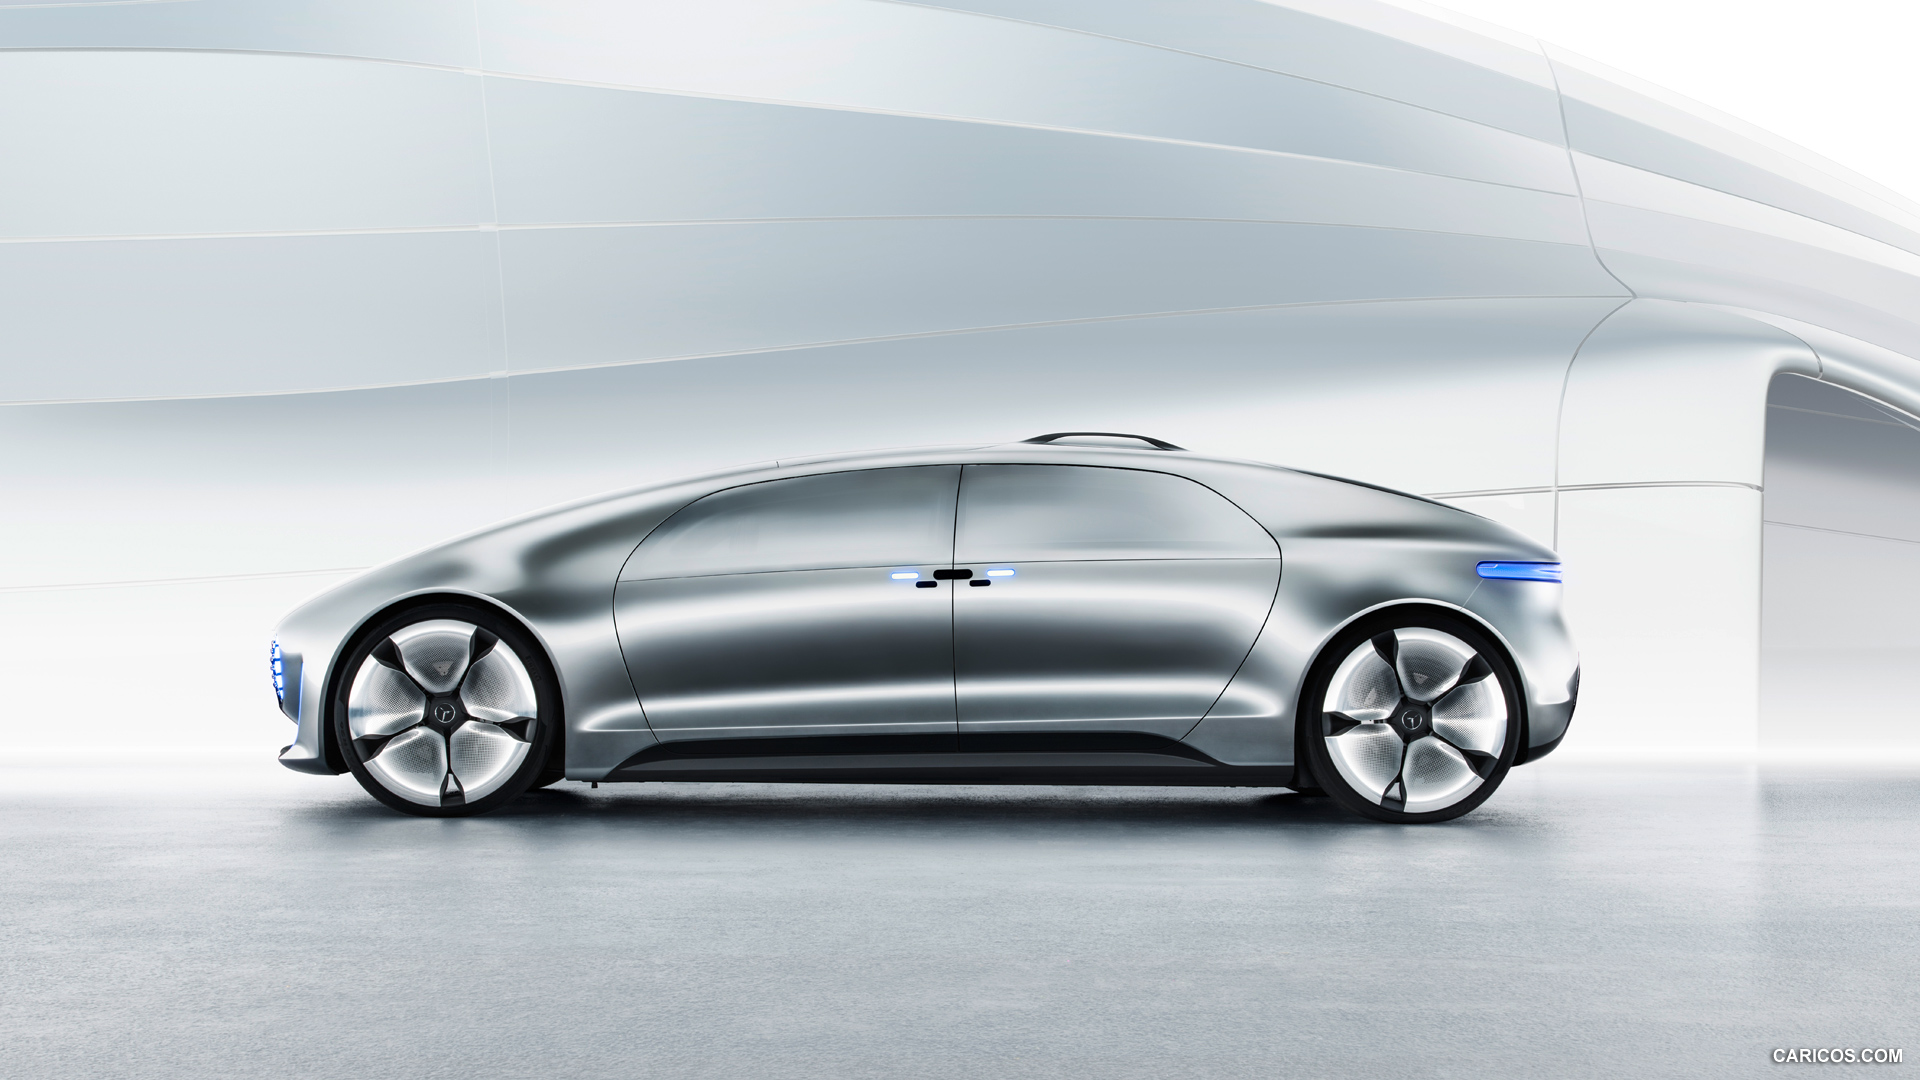 2015 Mercedes-Benz F 015 Luxury in Motion Concept  - Side, #66 of 92